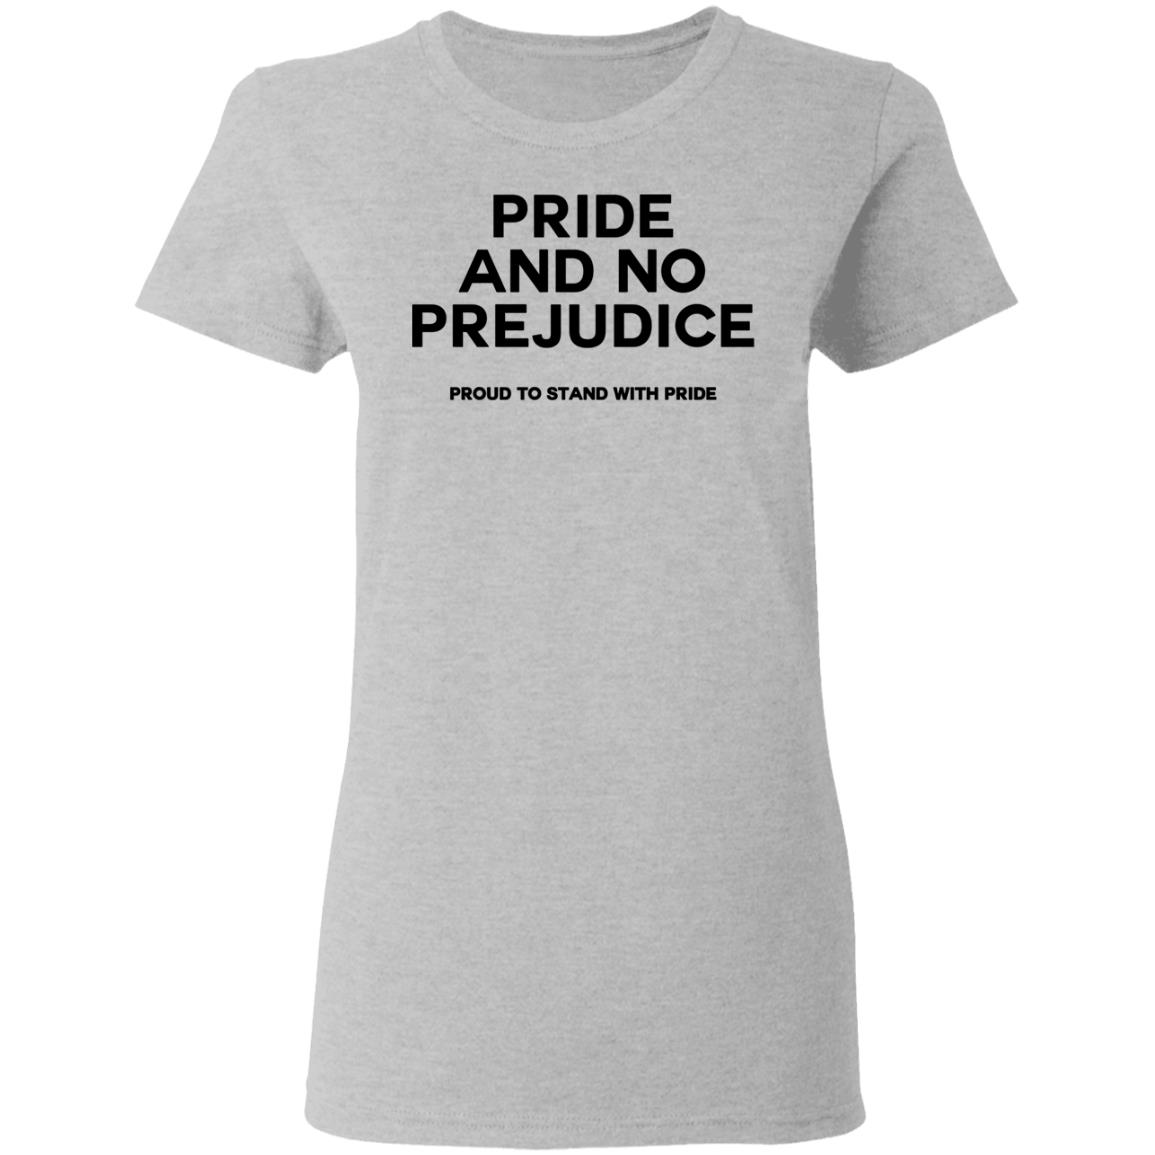 PRIDE and no prejudice proud to stand with pride Shirt